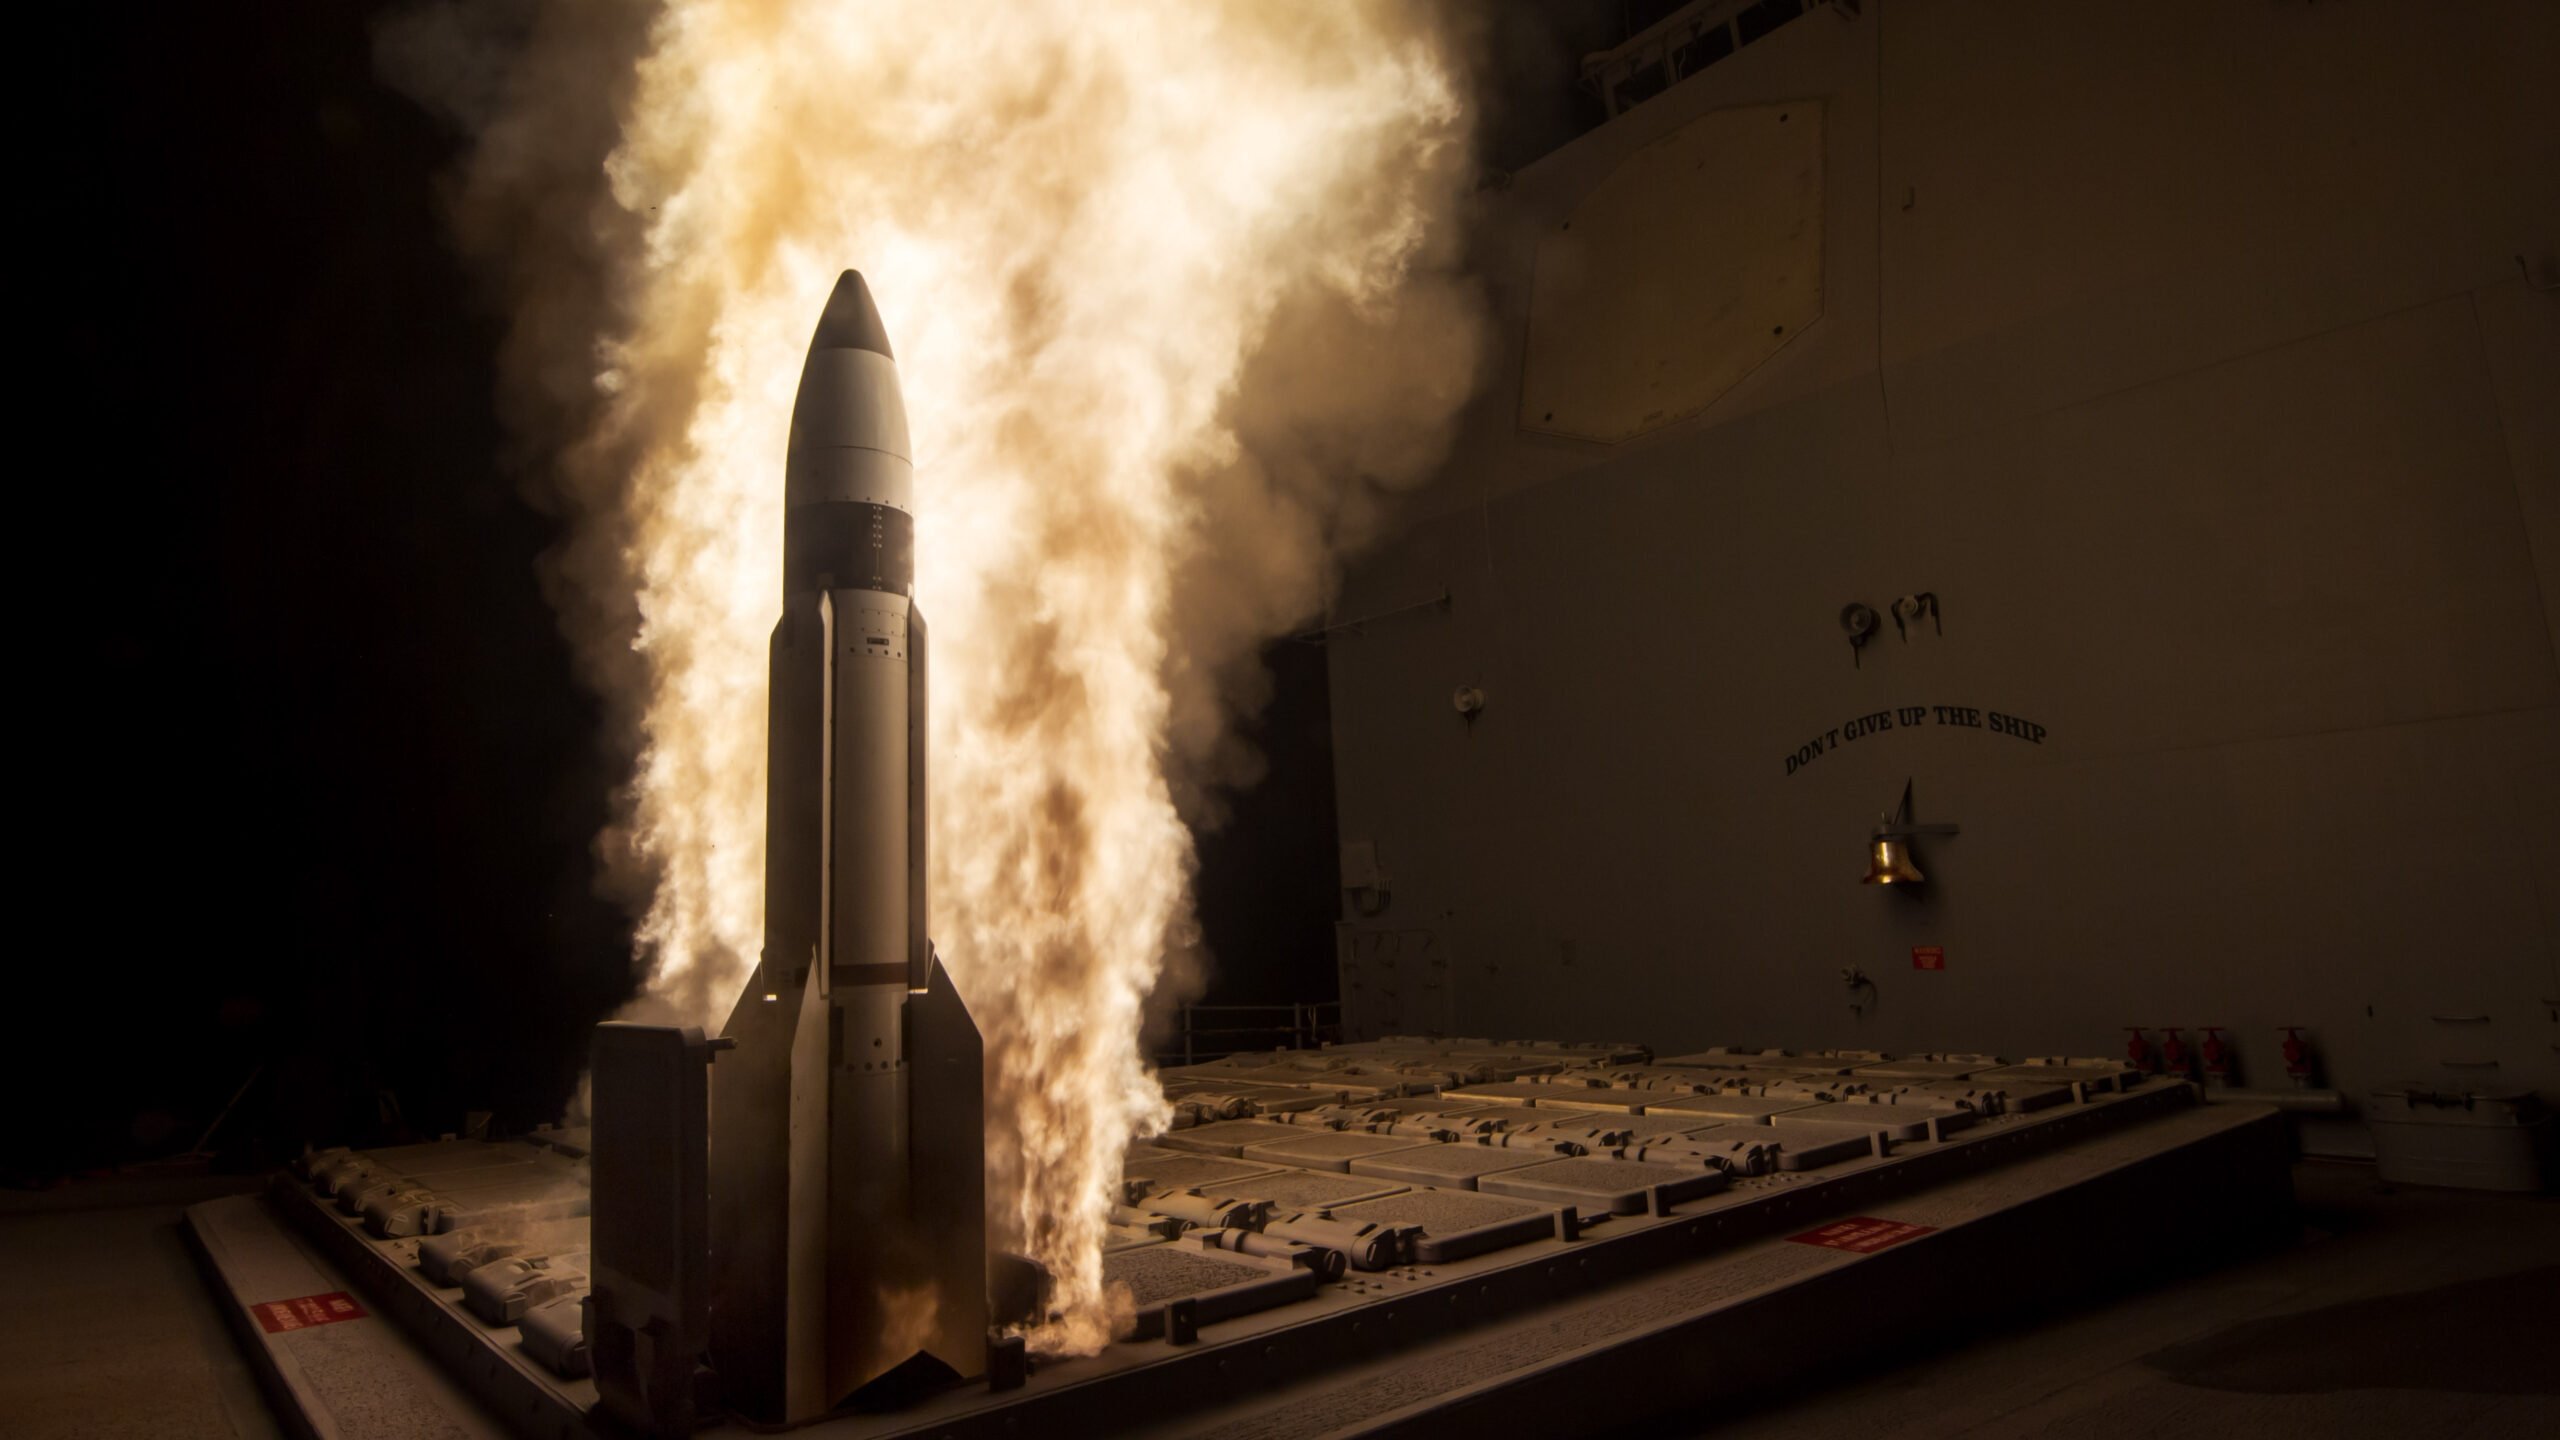 SPACECOM takes over missile defense ops from Strategic Command